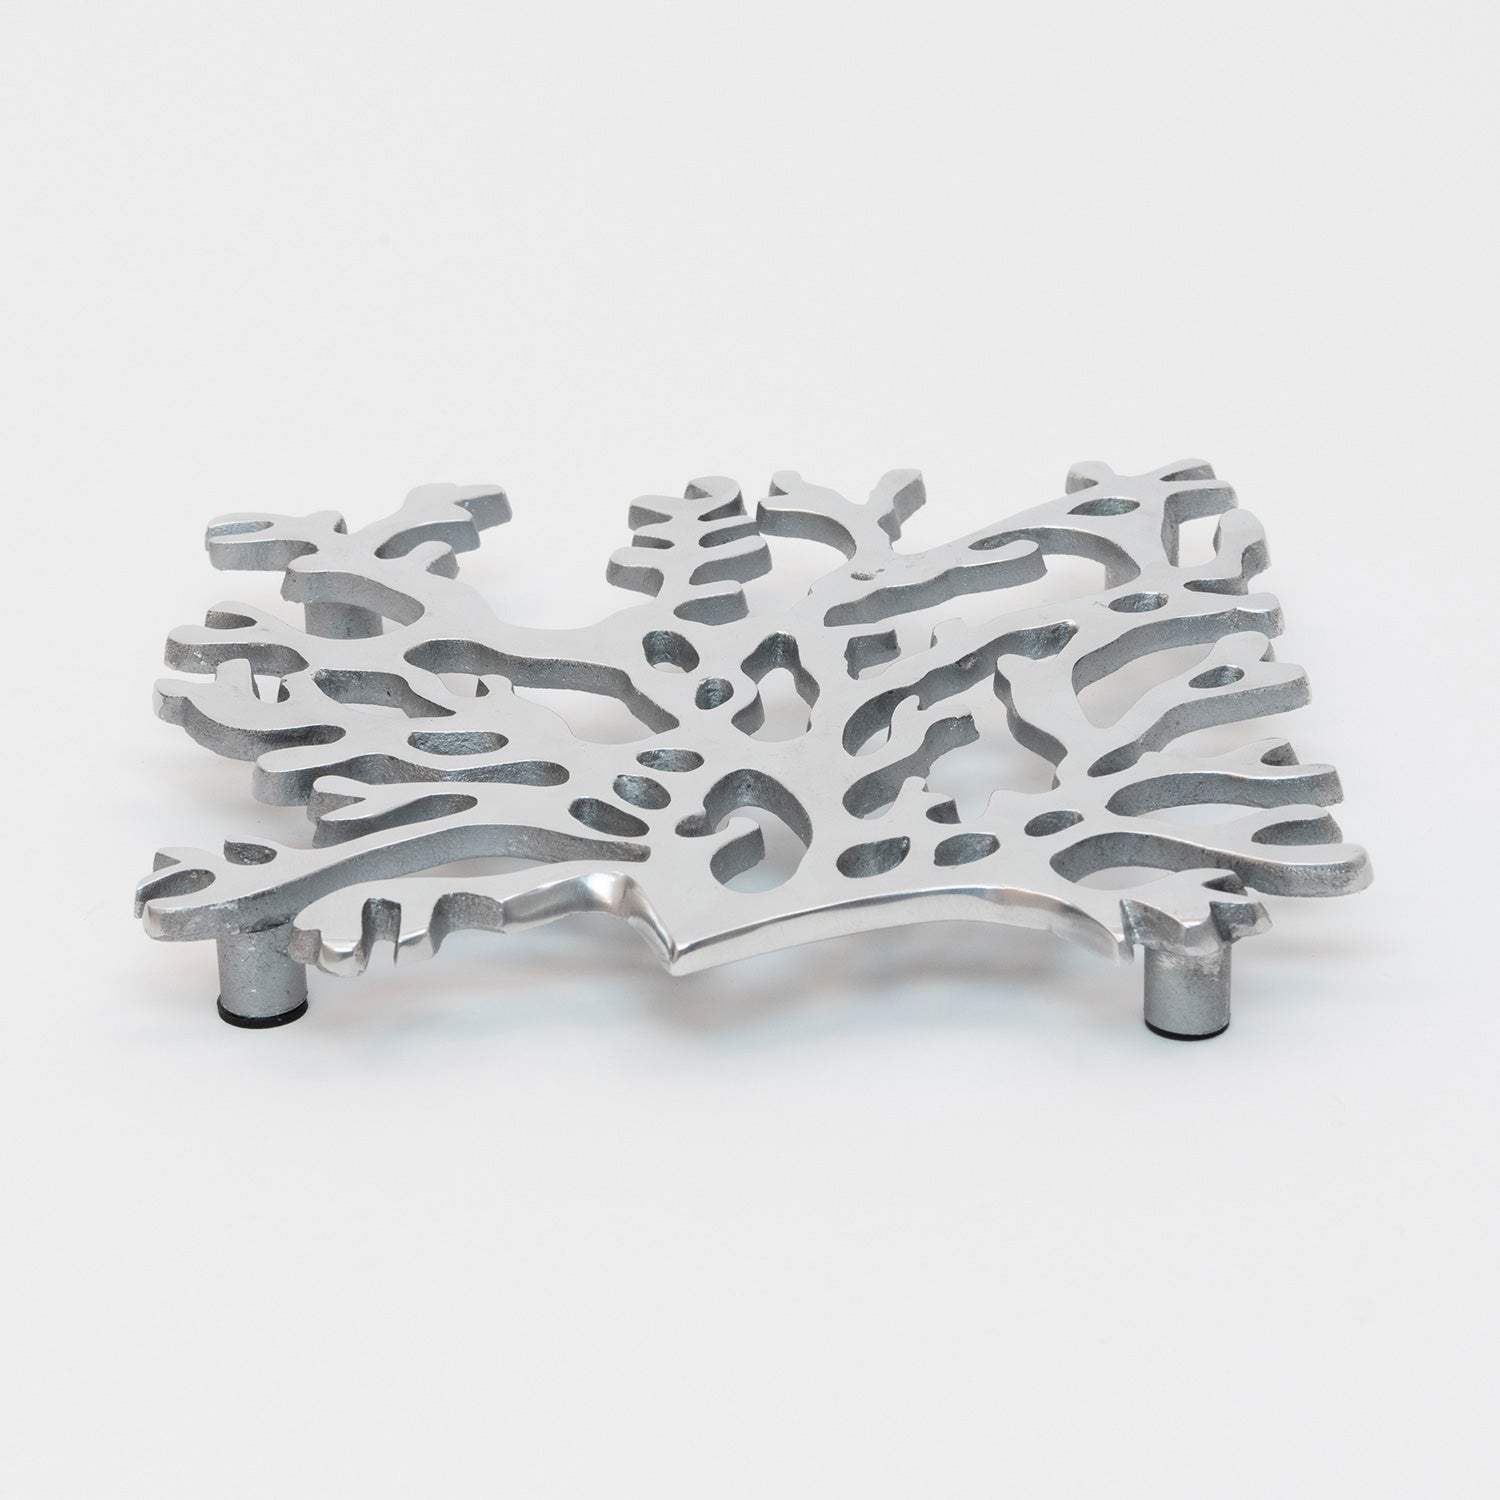 A top and side view of the stainless steel silver seaweed shaped trivet with black pads on the feet.